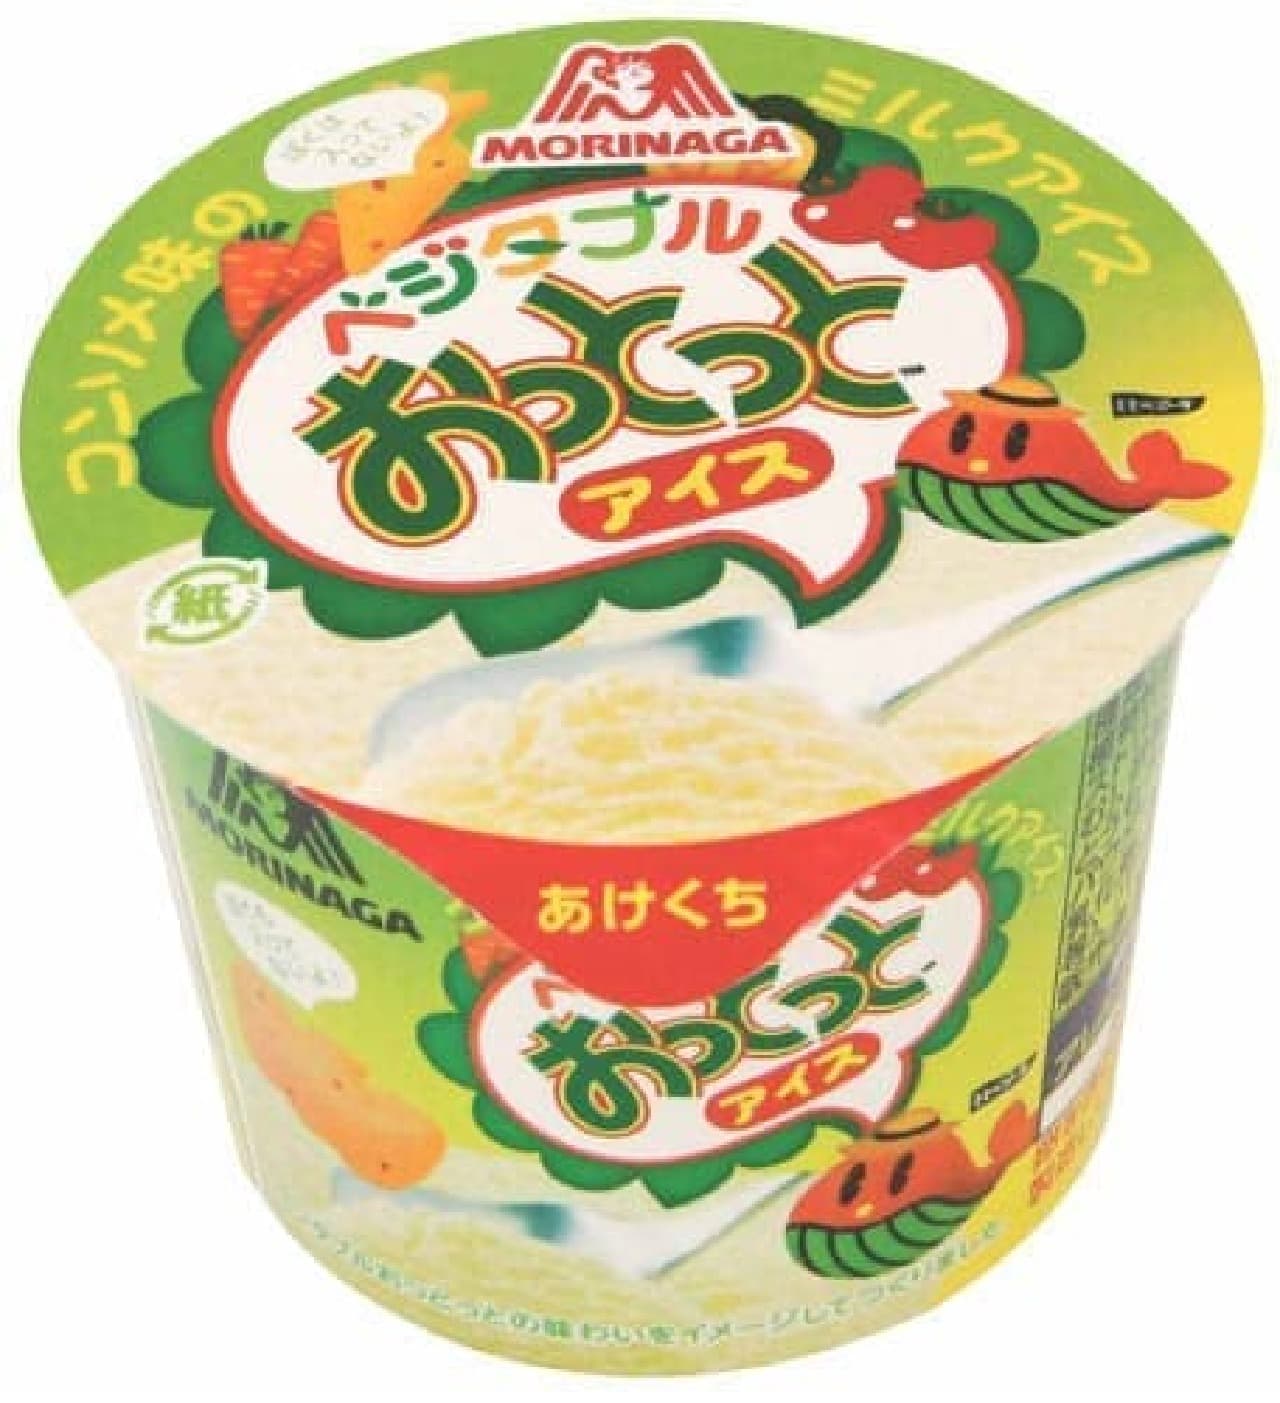 New to FamilyMart Limited "Oops Ice"! "Surprising consomme taste" that